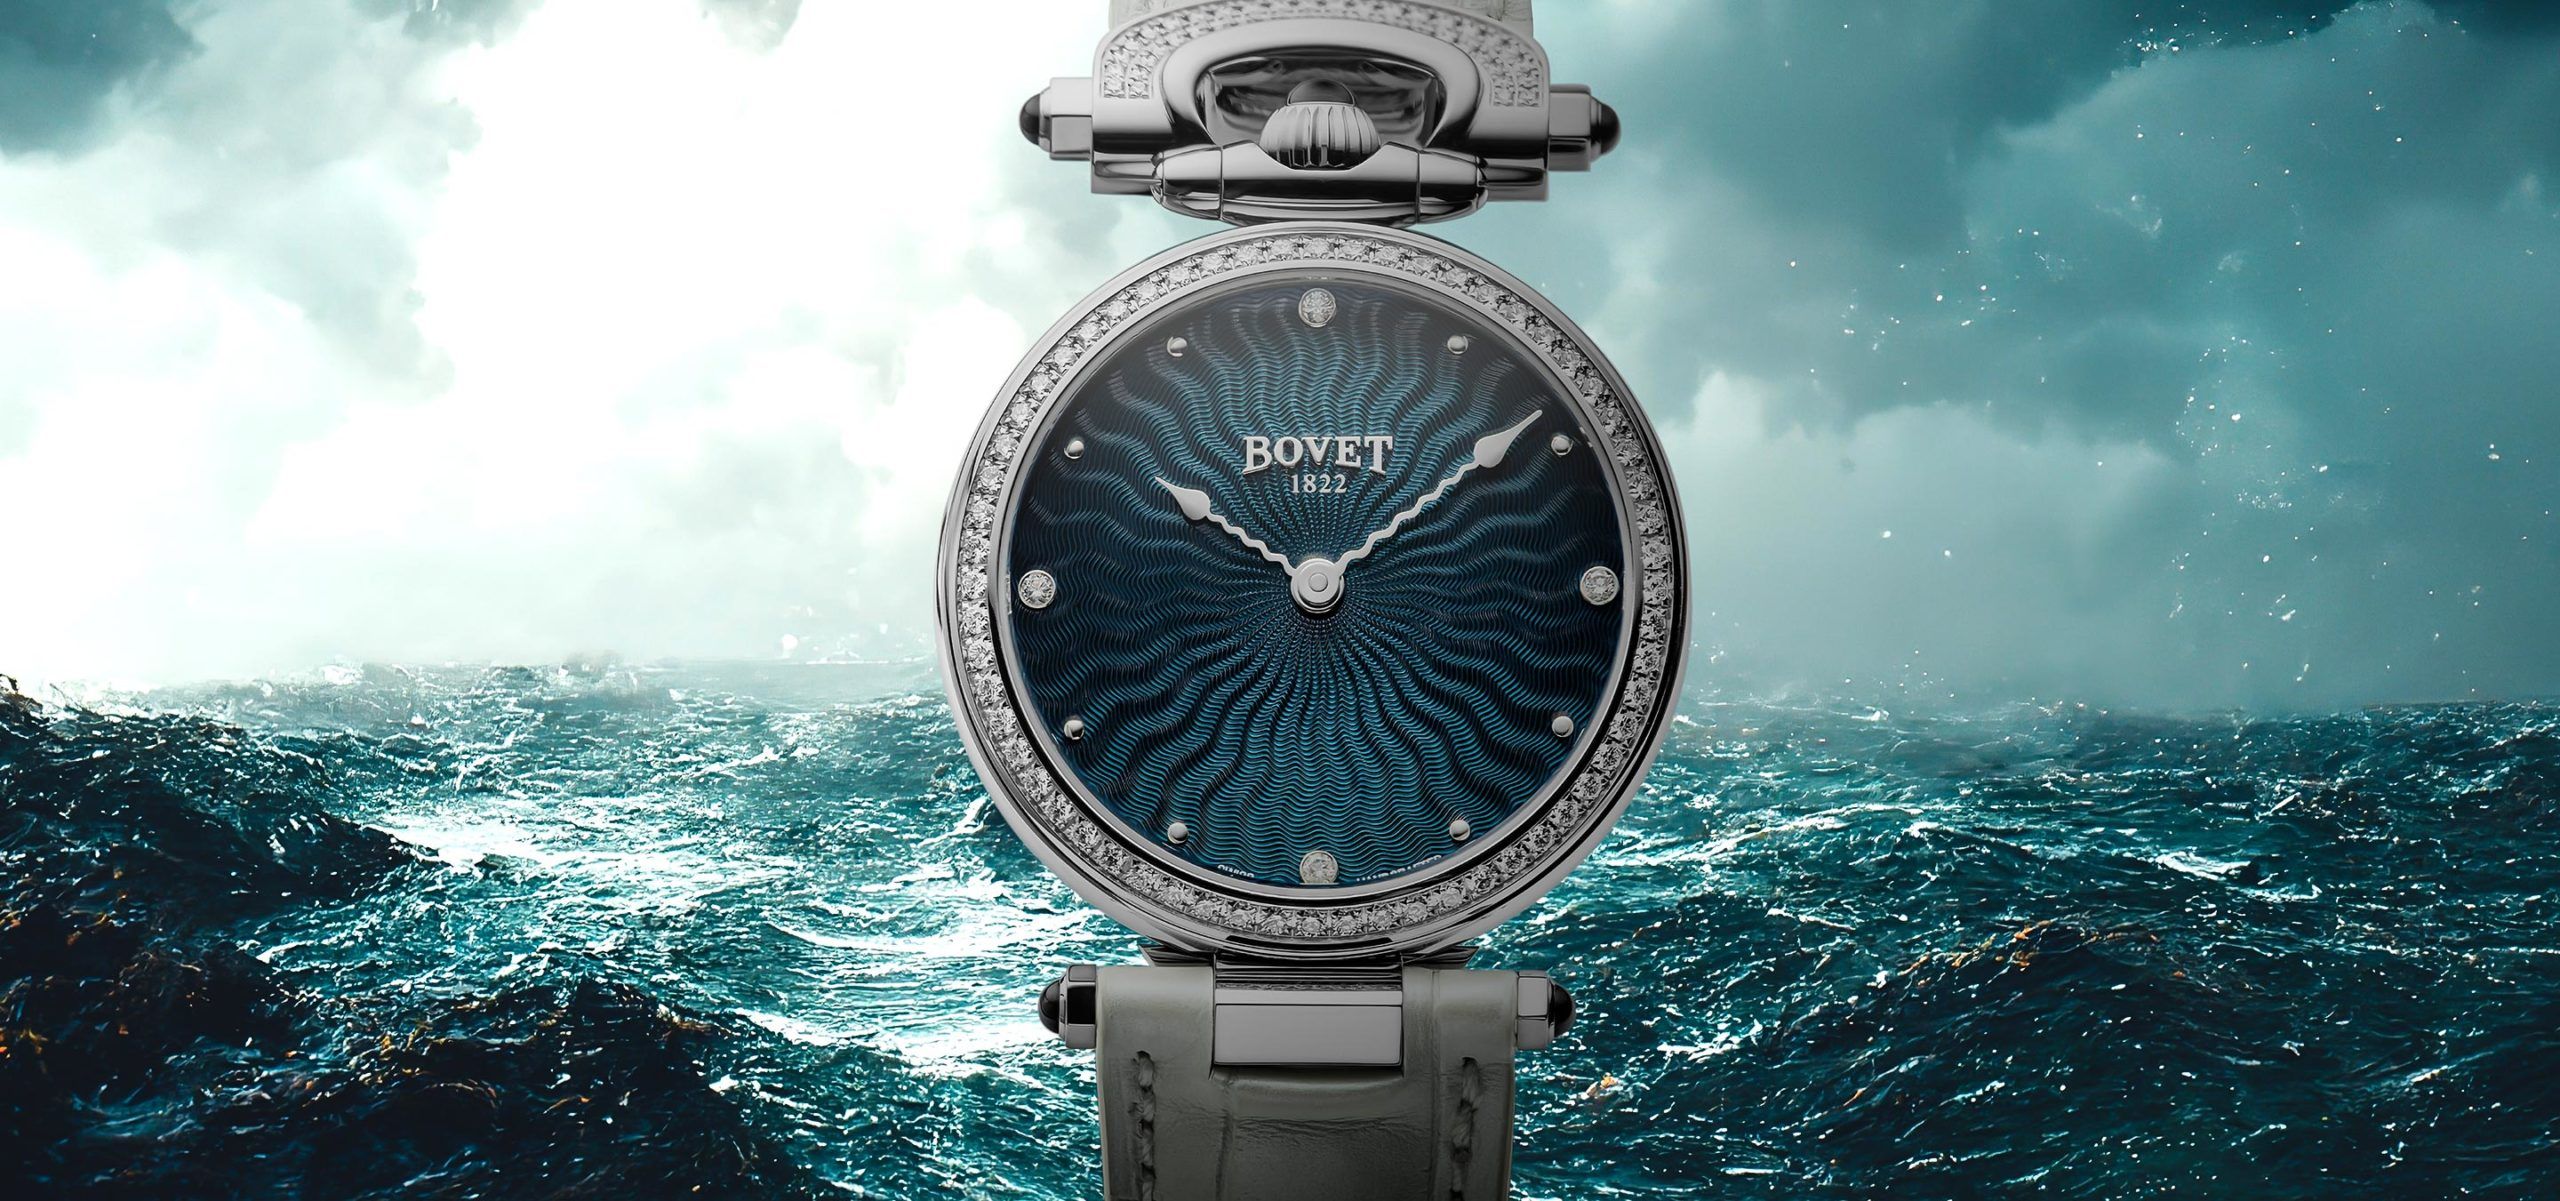 Two Faces Of The Sea: The Bovet Fleurier Miss Audrey Guilloché In Turquoise And Teal Blue